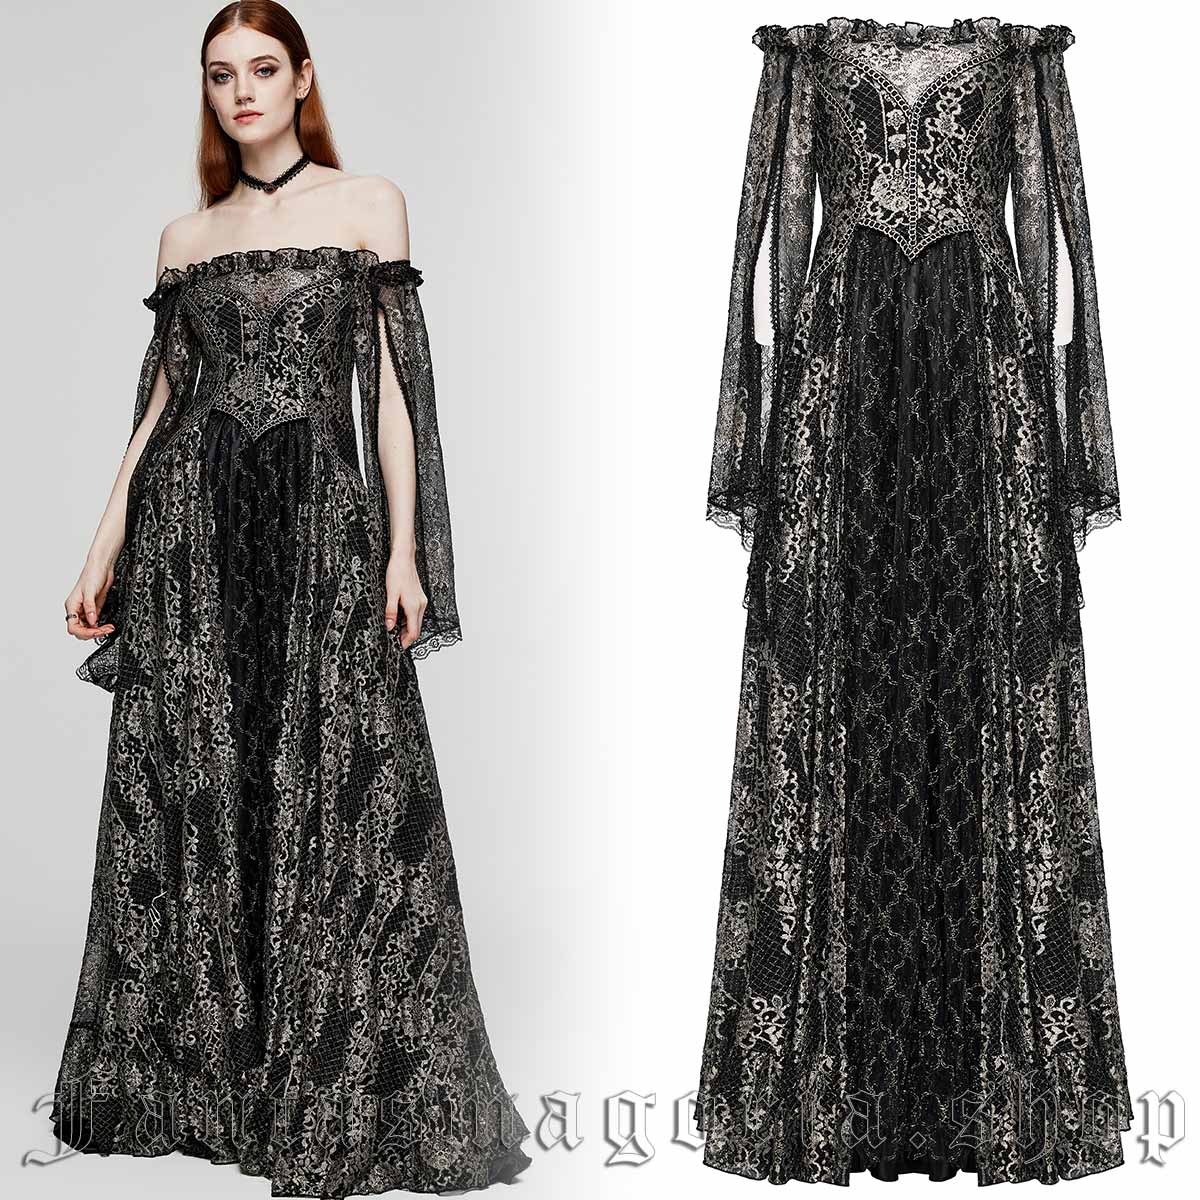 Gothic black and gold lace off-shoulder long-sleeve gown dress. - Punk Rave - WQ-620/BK-GD